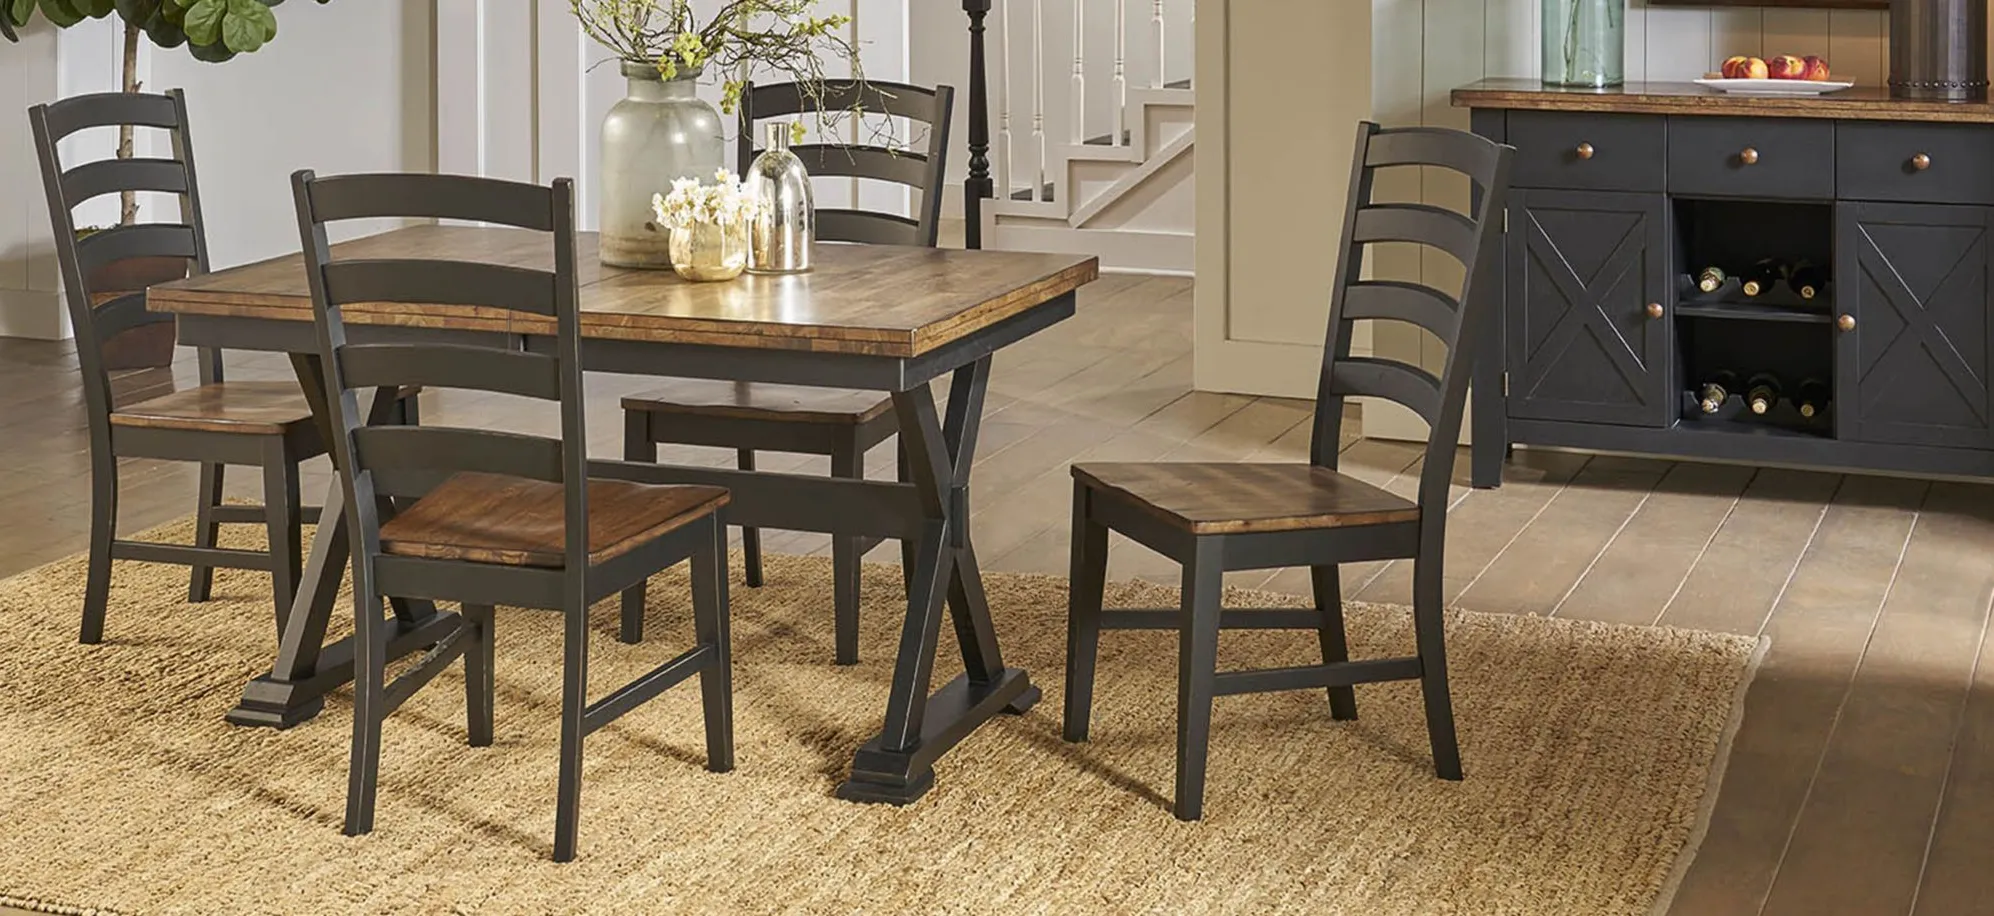 Stone Creek 5-pc. Dining Set in Chickory/Black by A-America